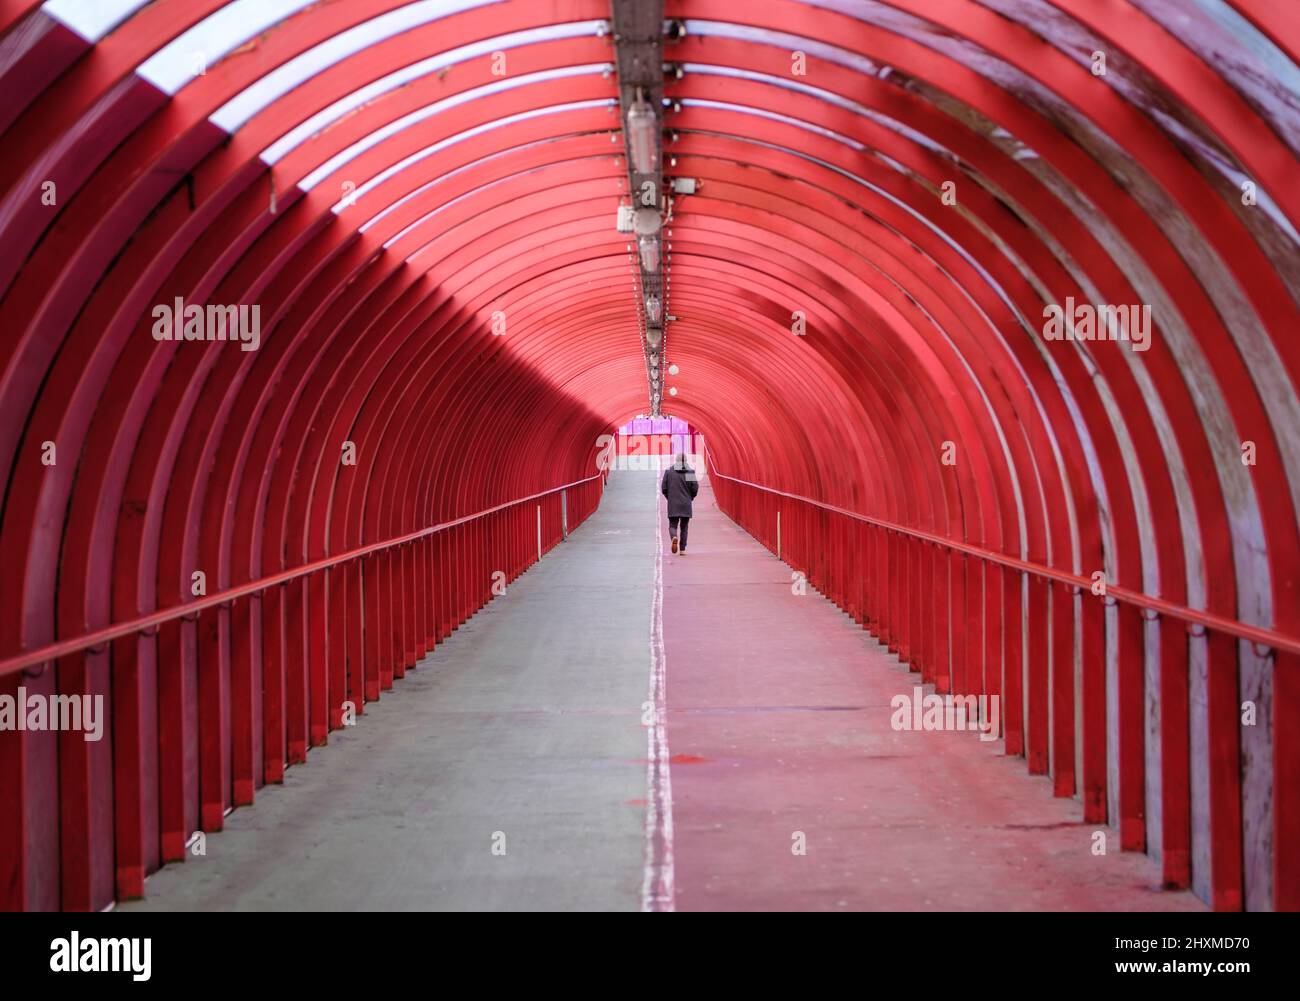 A Man Walking Alone Through A Covered Walkway At An Airport Or Train Station Stock Photo